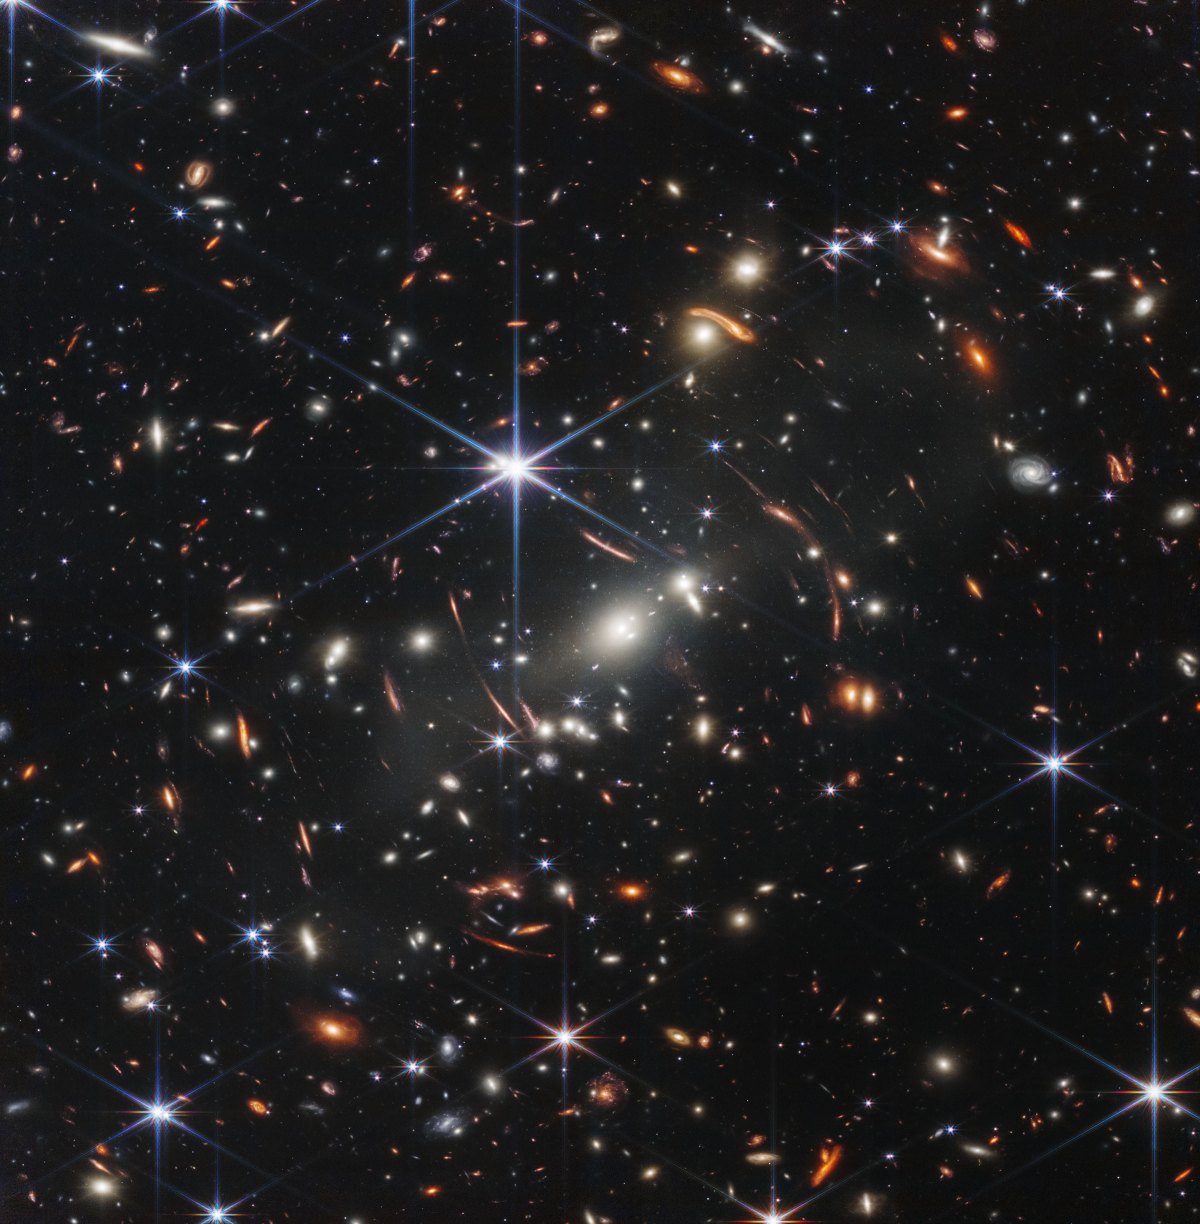 One of the first images from NASAâs James Webb Space Telescope showing galaxy cluster SMACS 0723.